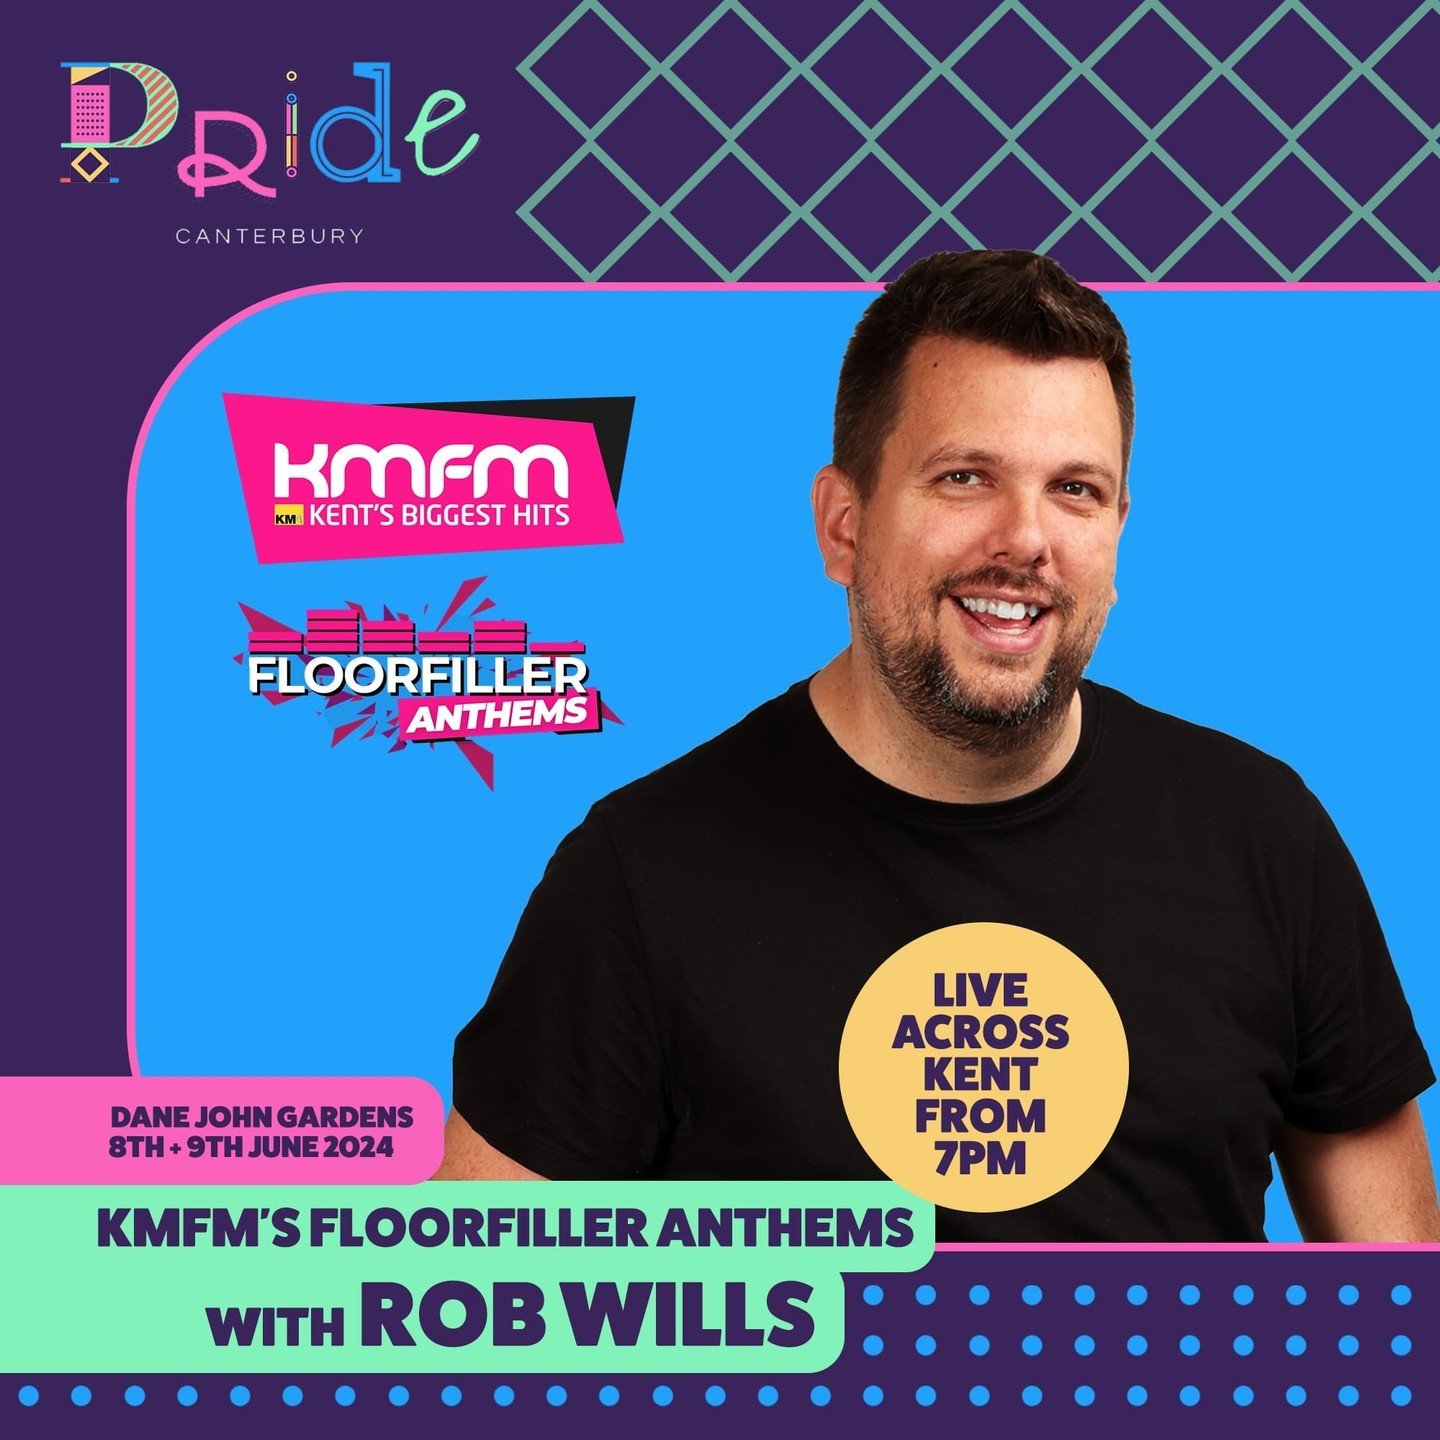 📣 Pride Canterbury 2024 line-up Announcement 

@kmfmofficial Floorfiller Anthems Live 
Rob Wills from KMFM is back and will be Broadcasting Live from our Main Stage across the whole of Kent at 7pm on Saturday 8th June with Floorfiller Anthems.